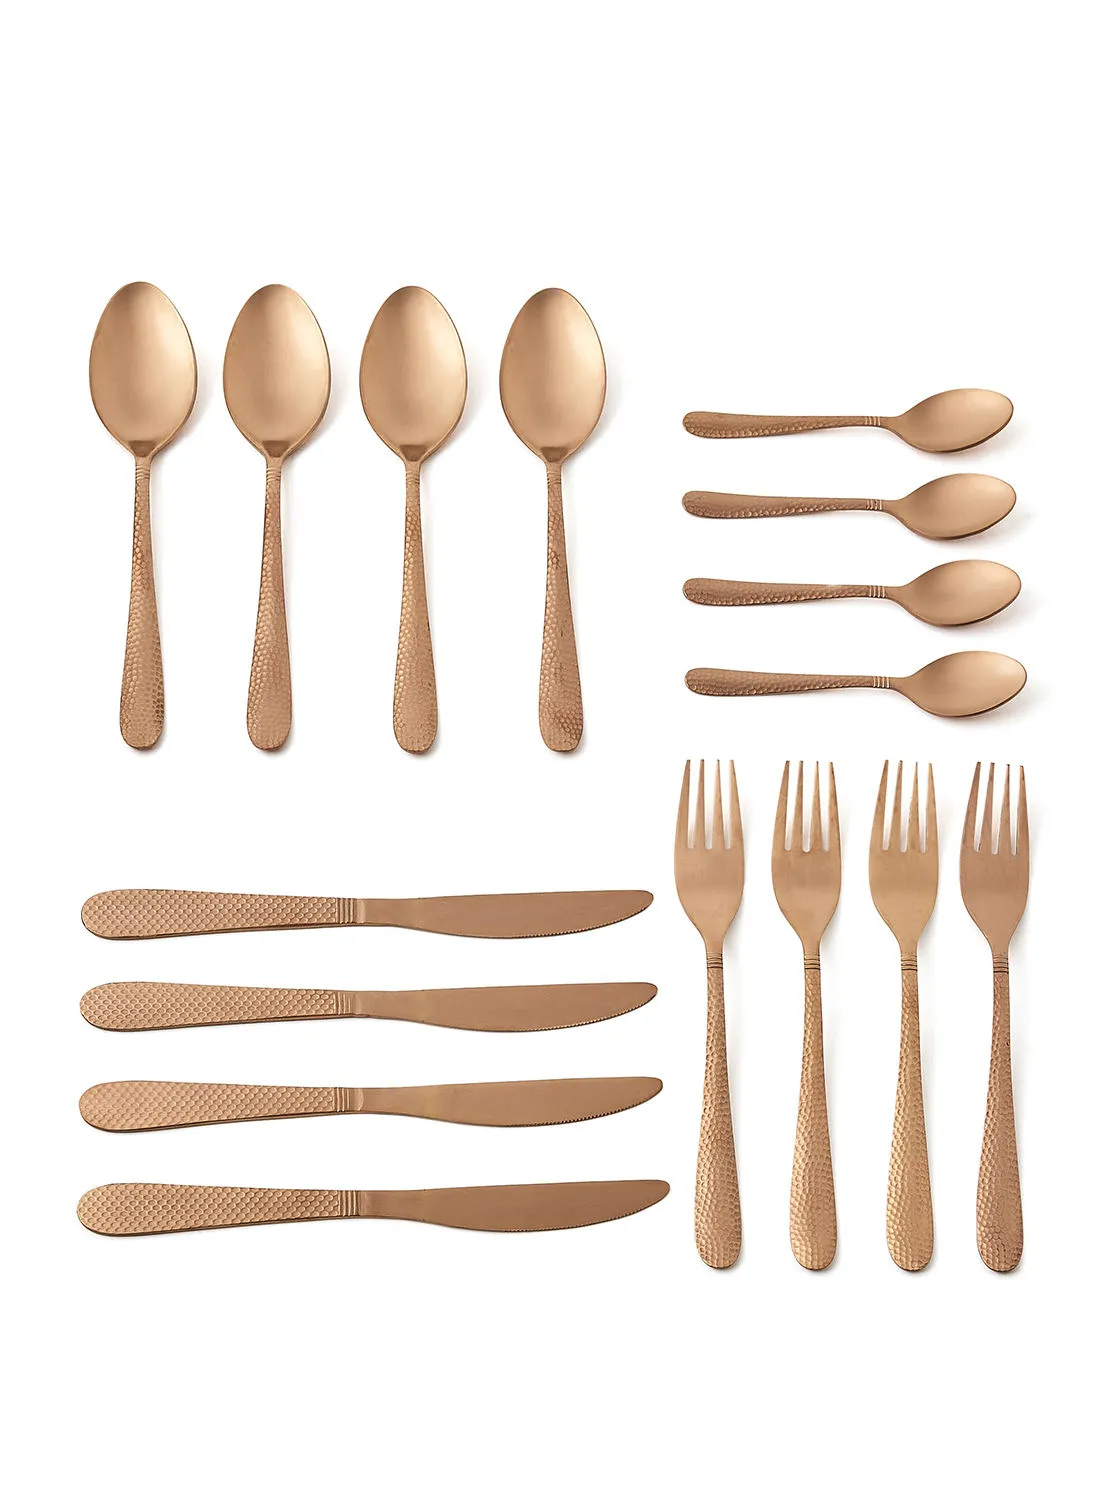 Amal 16 Piece Cutlery Set - Made Of Stainless Steel - Silverware Flatware - Spoons And Forks Set, Spoon Set - Table Spoons, Tea Spoons, Forks, Knives - Serves 4 - Design Copper Aster